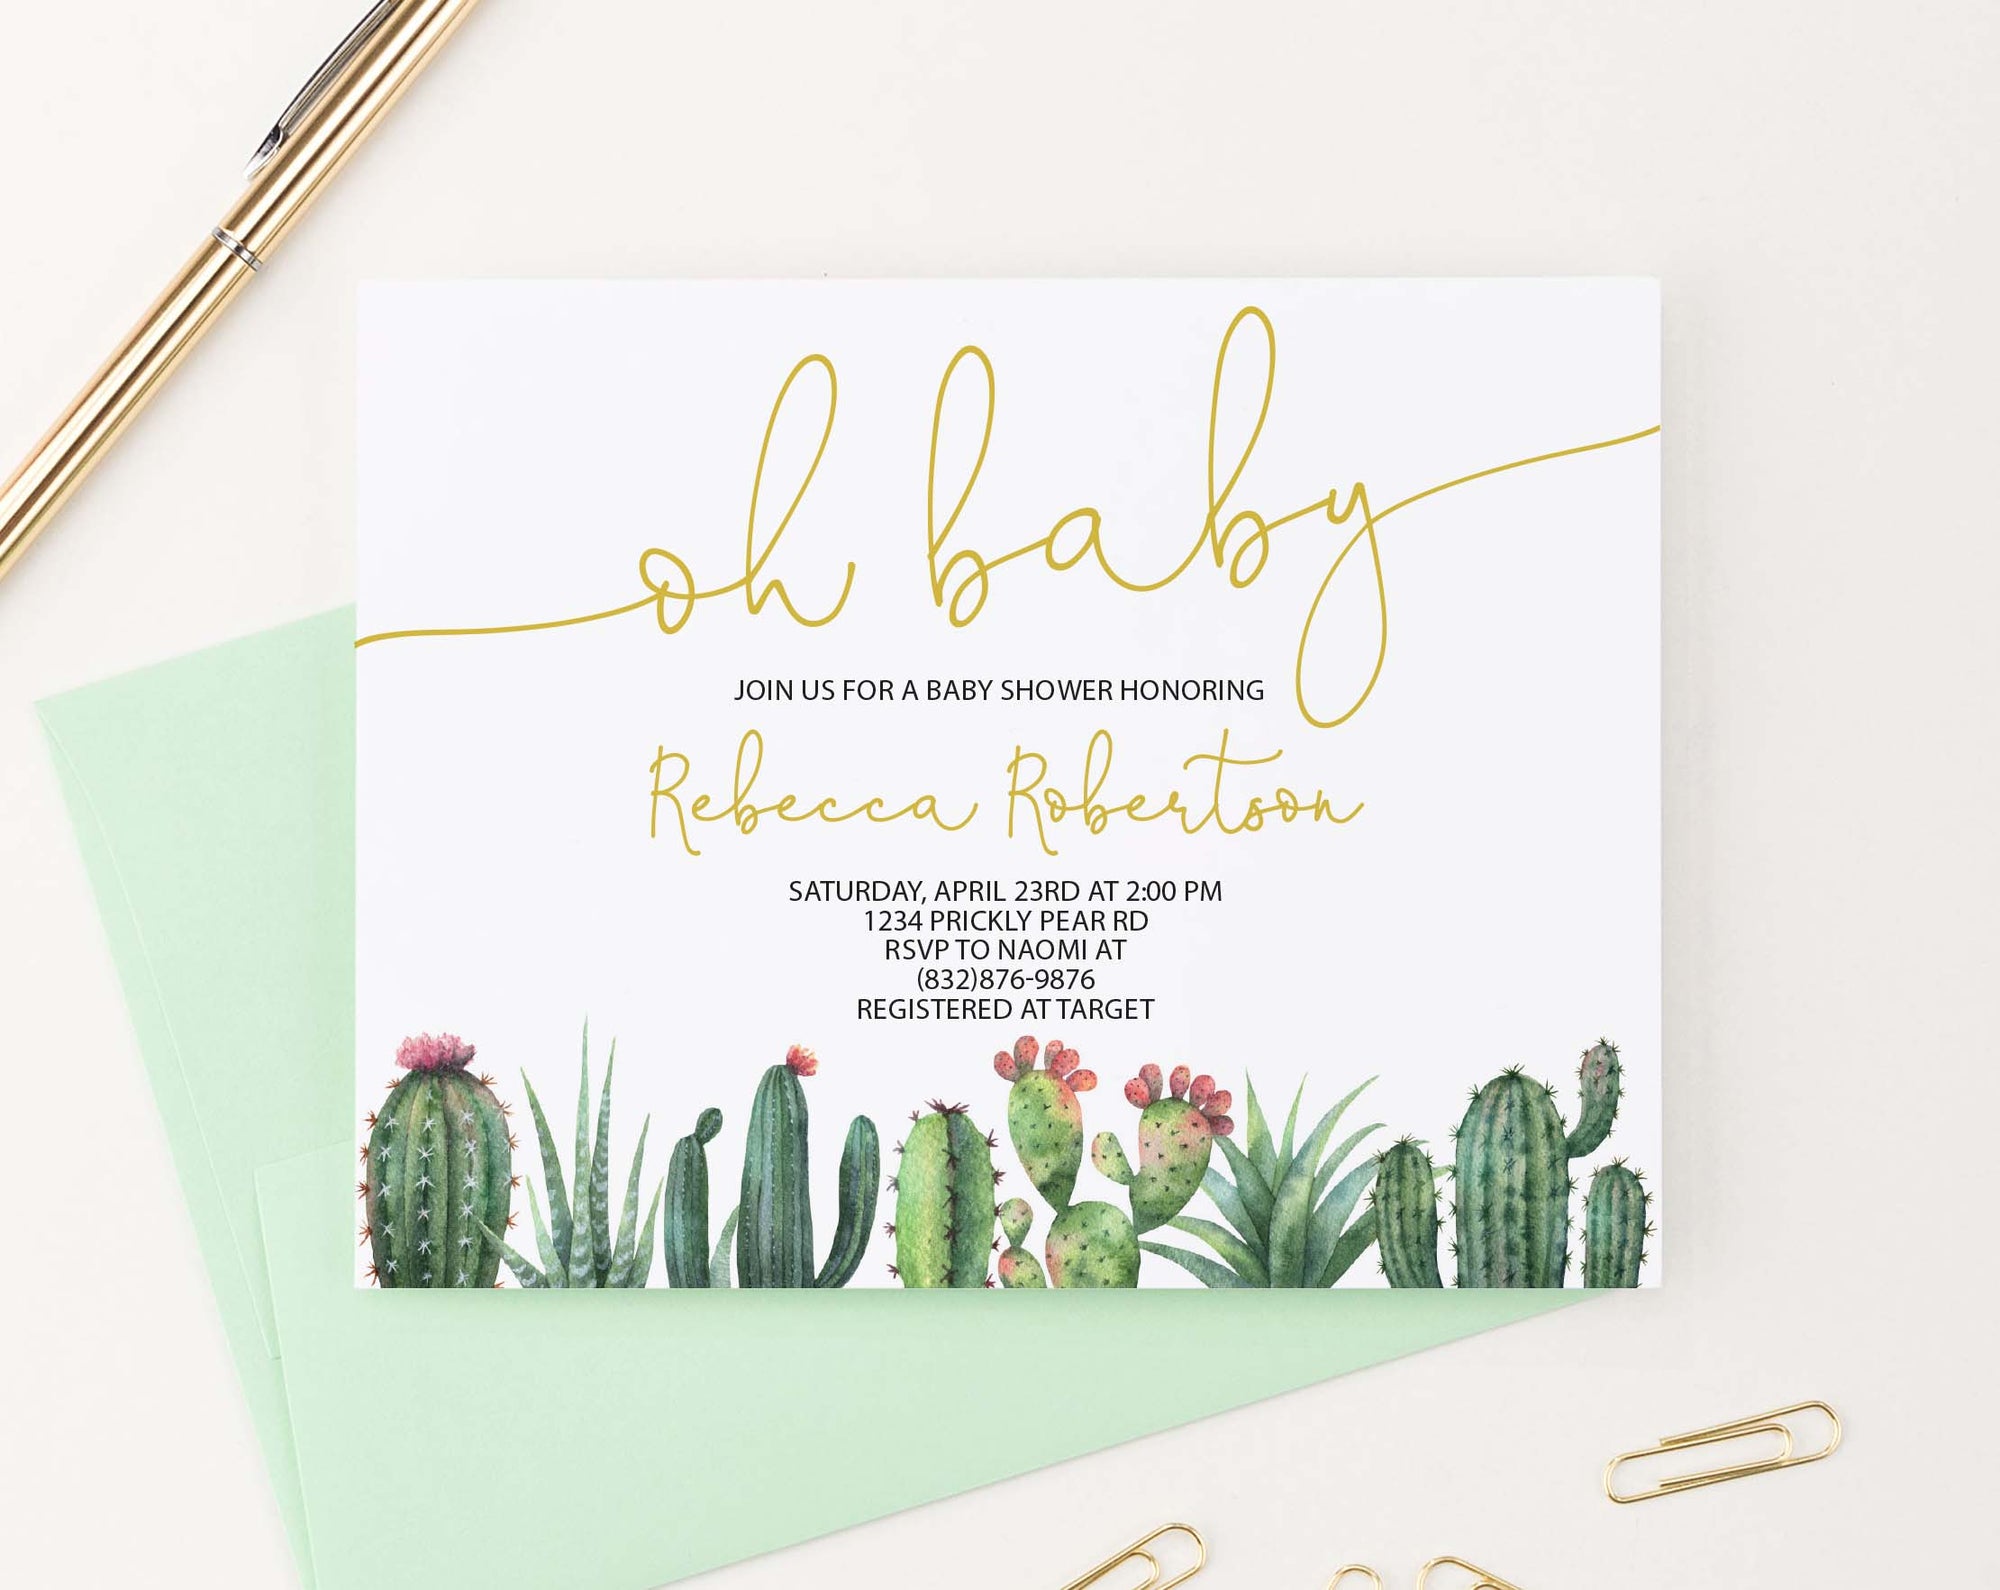 BSI080 oh baby baby shower invitation with bottom cactus fiesta succulents elegant